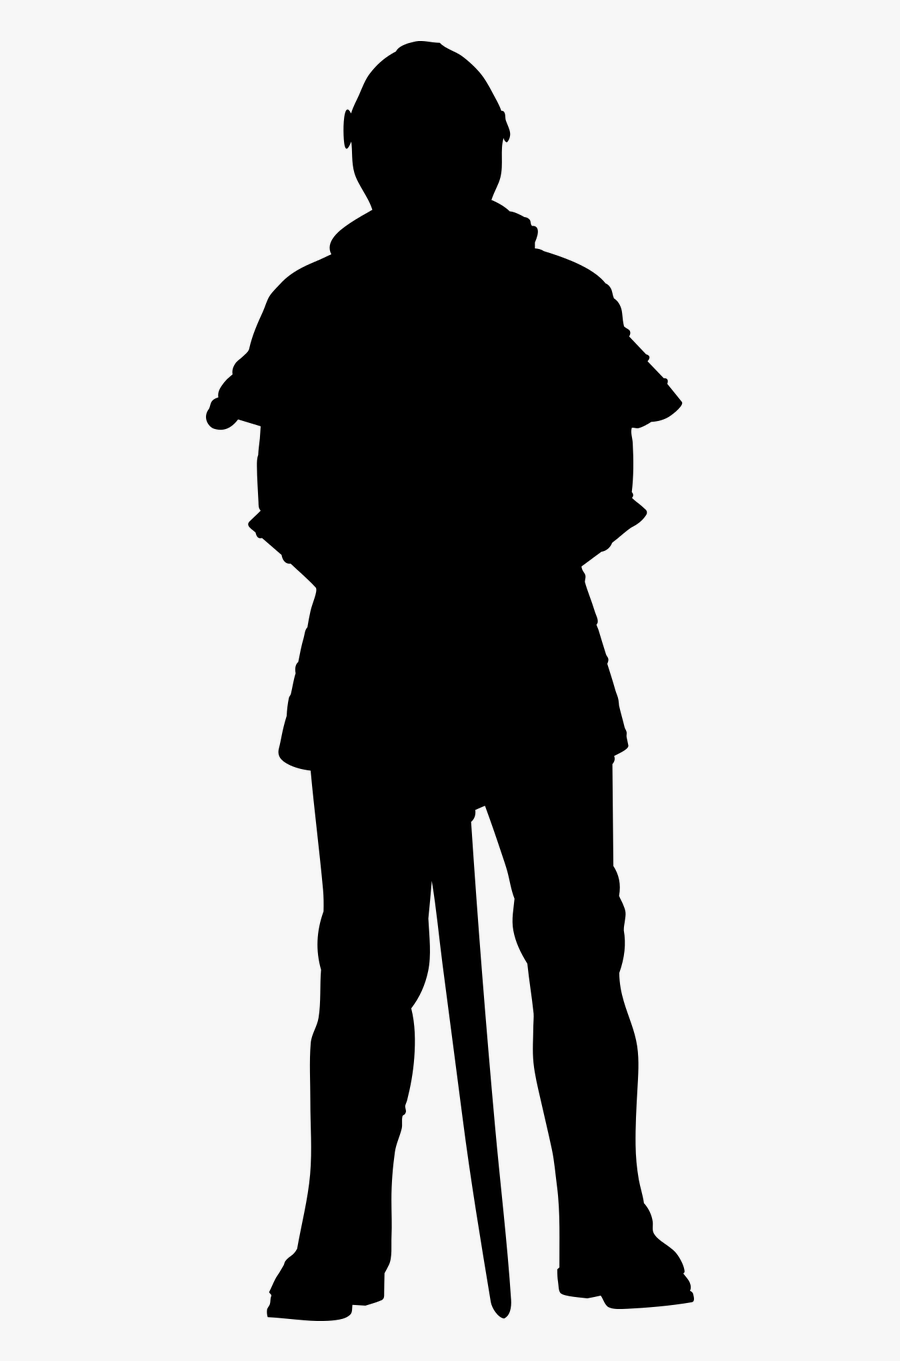 Three Billboards Outside Ebbing, Missouri Review Film - Character Silhouette Png, Transparent Clipart